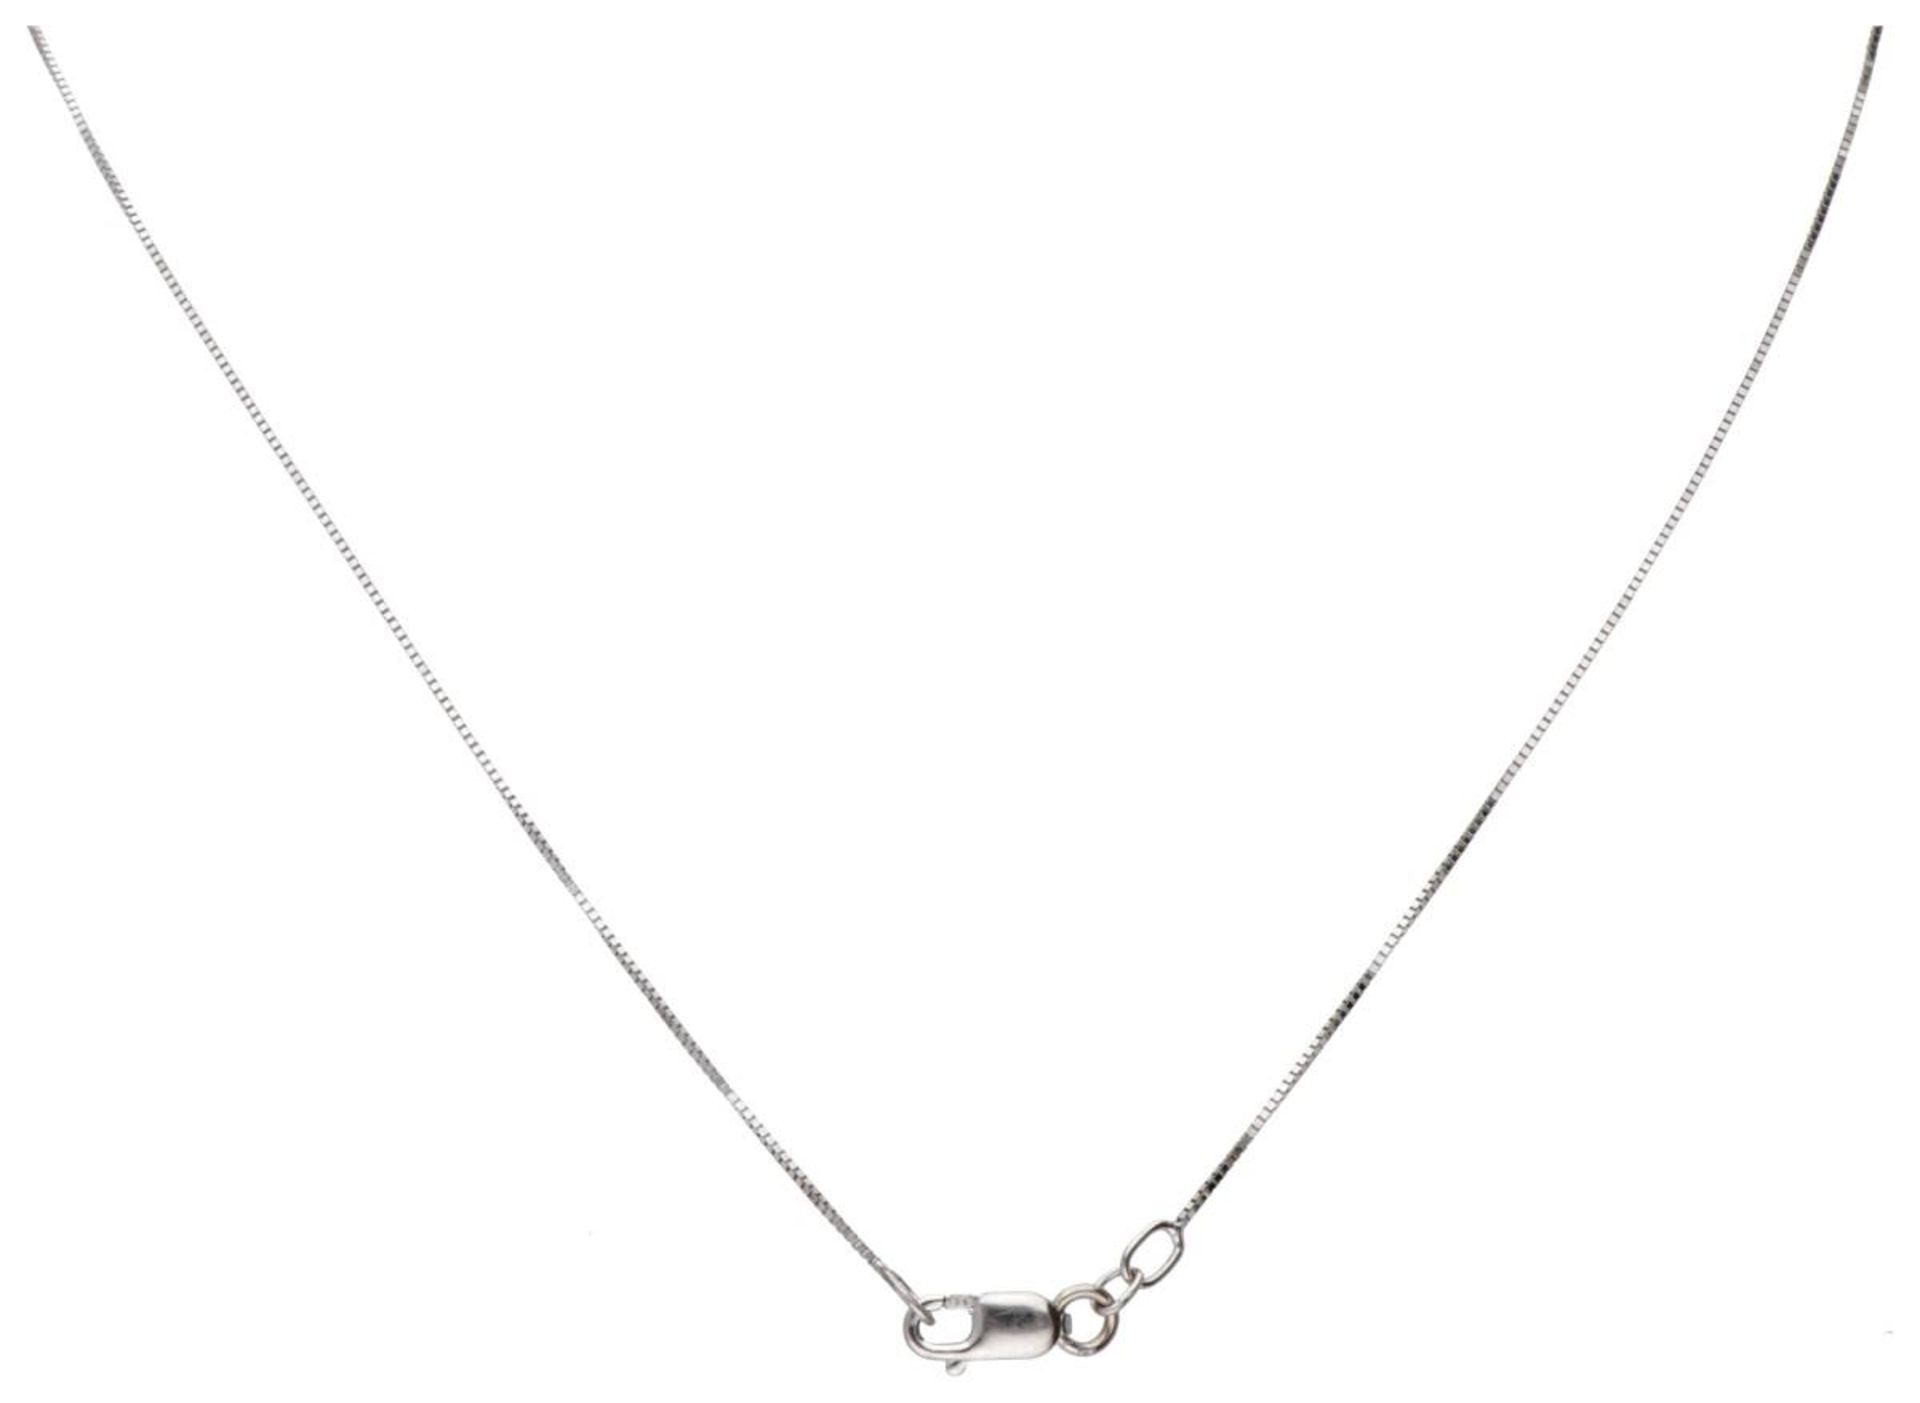 14K. White gold necklace with cluster pendant set with approx. 0.50 ct. diamond. - Image 6 of 6